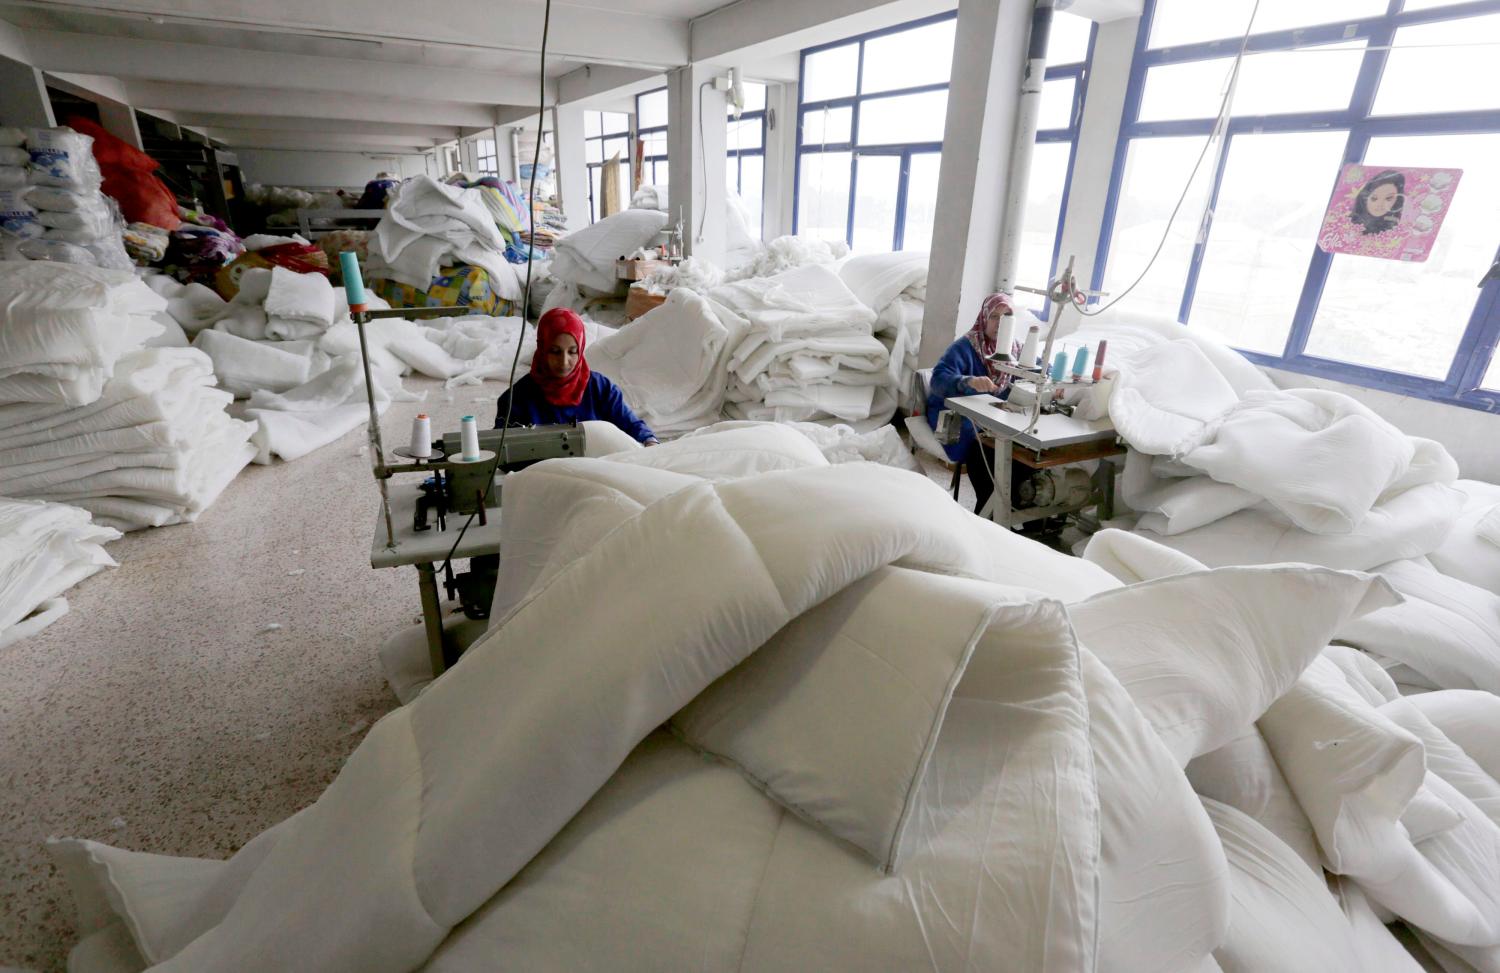 A worker sews blankets made from recycled plastic bottles at a recycling plant in Chelghoum Laid, 360 km (224 miles) east of Algiers February 26, 2014. Picture taken February 26, 2014. REUTERS/Louafi Larbi  (ALGERIA - Tags: ENVIRONMENT SOCIETY)